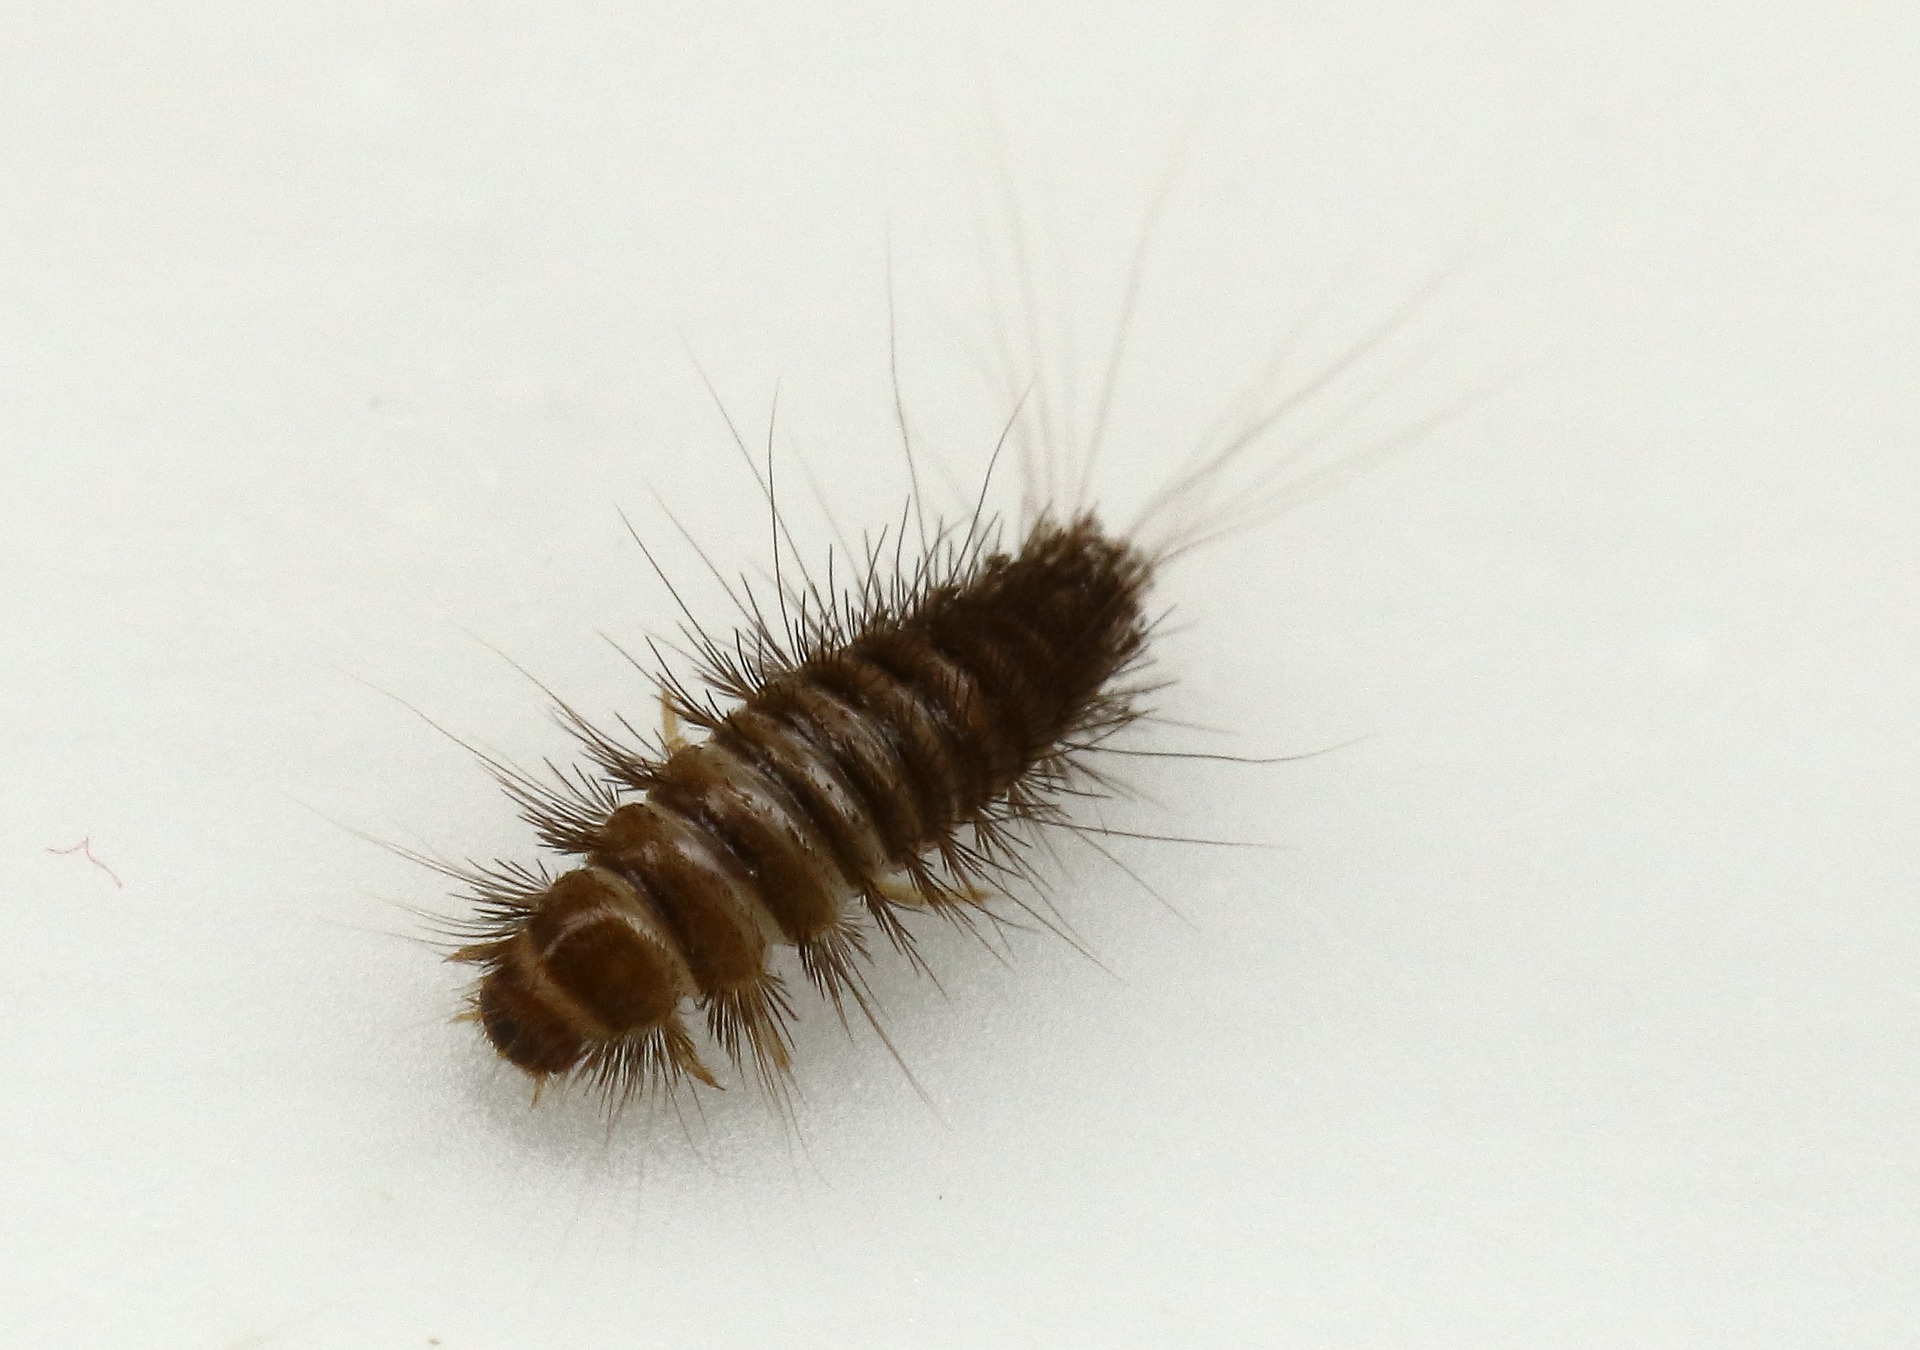 https://www.expertcarpetcleaning.com.au/wp-content/uploads/2019/05/How-to-get-rid-of-the-pesky-Carpet-Beetle.jpg